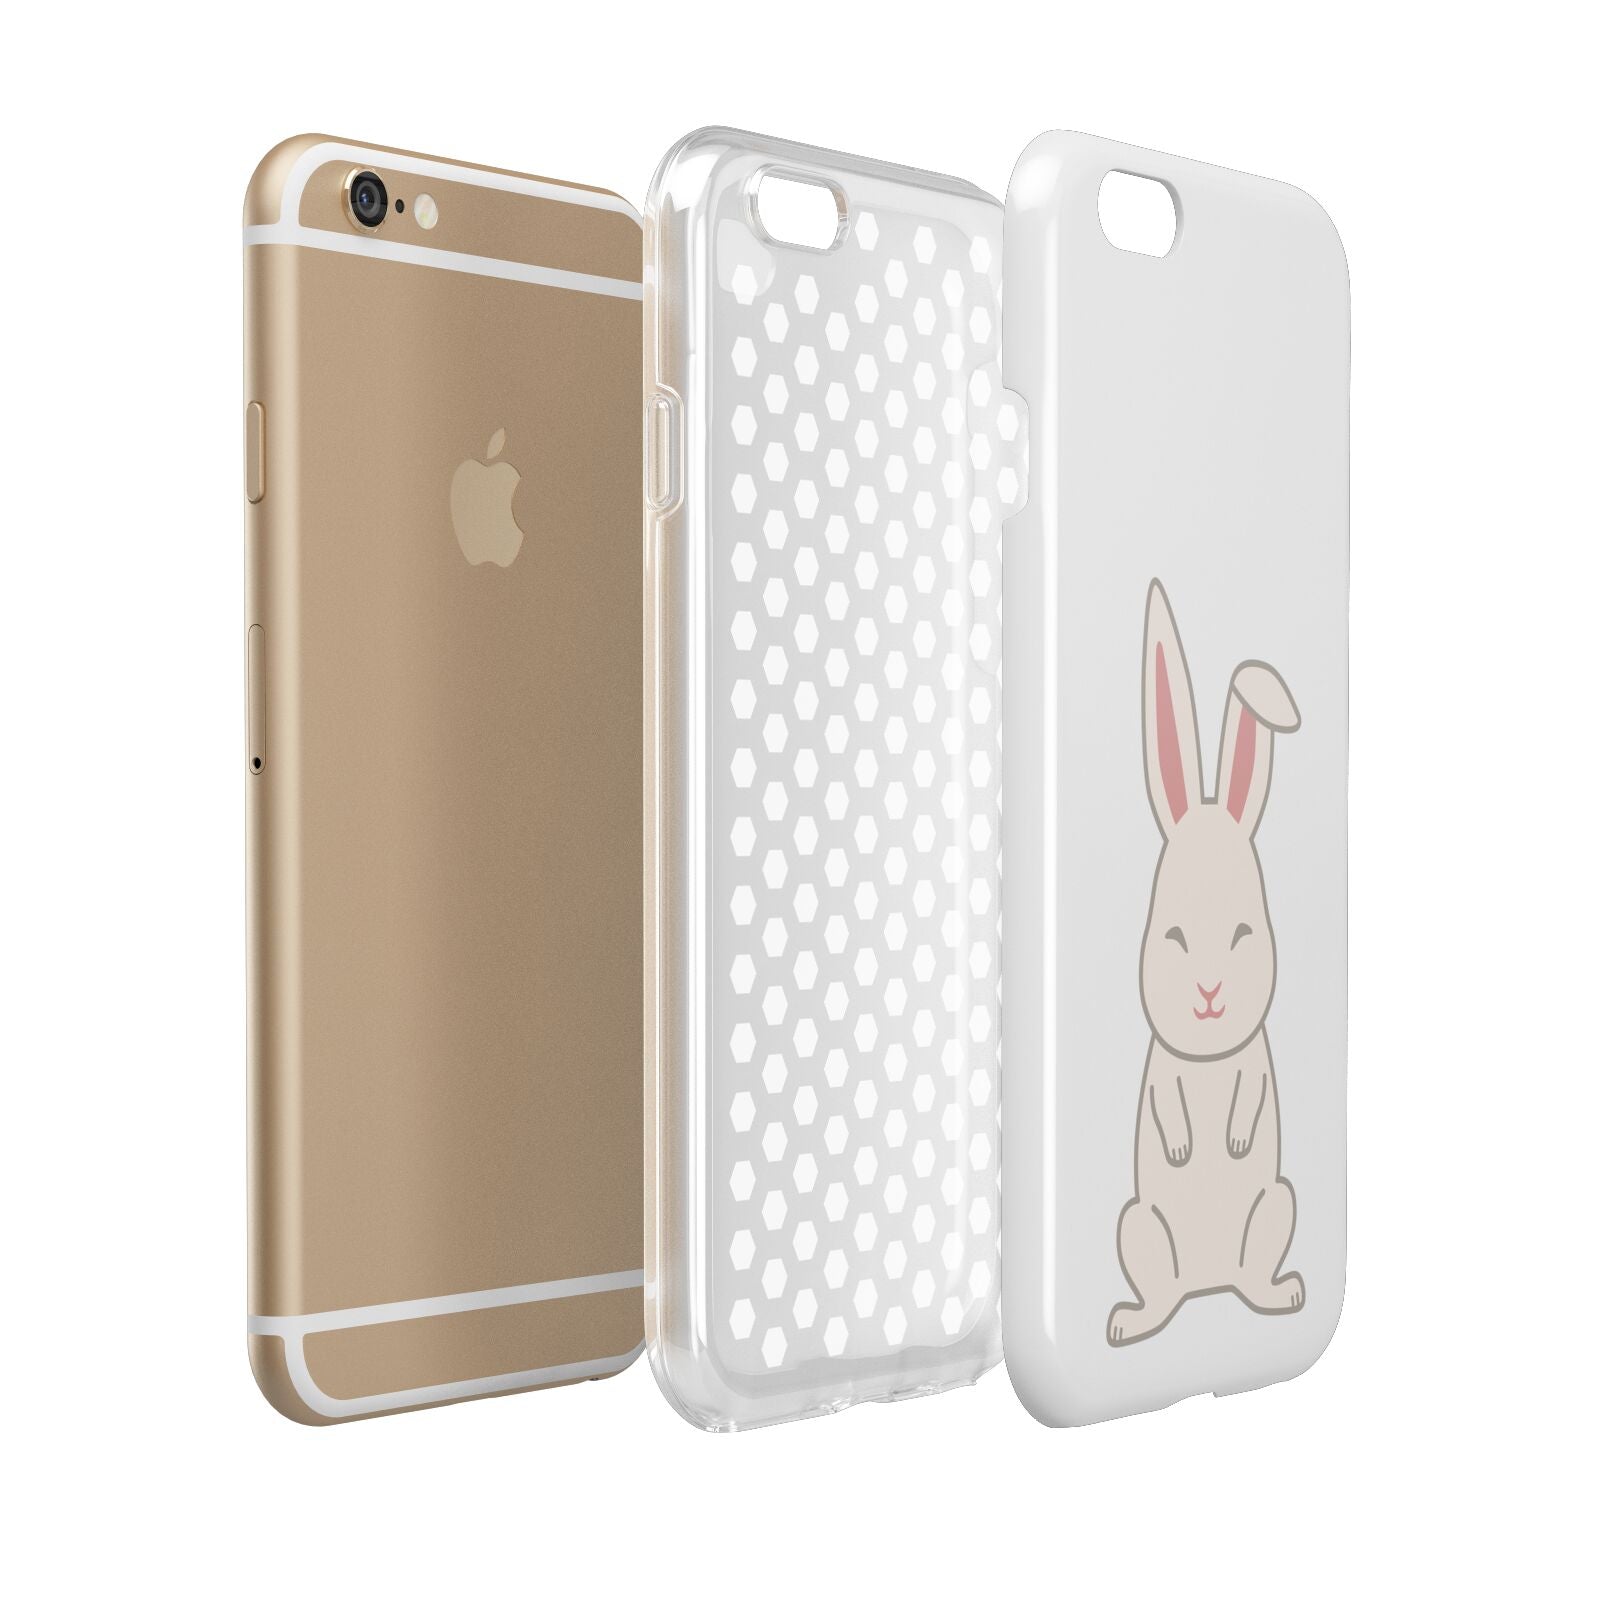 Bunny Apple iPhone 6 3D Tough Case Expanded view